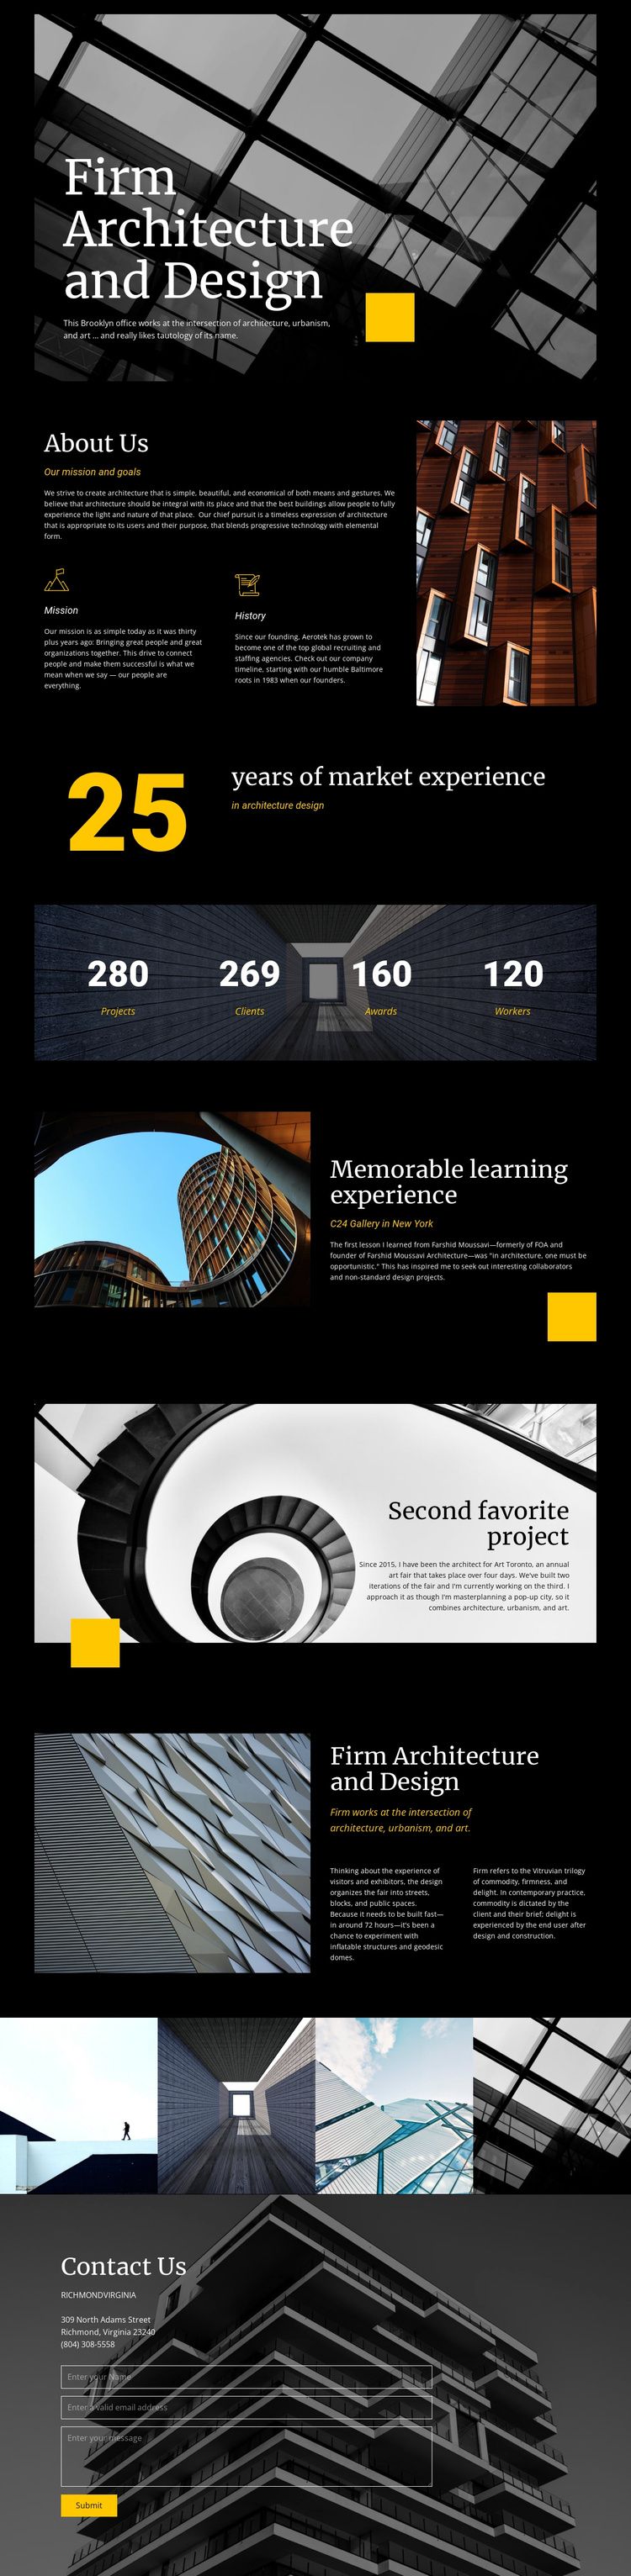 Firm architecture and Design Joomla Template